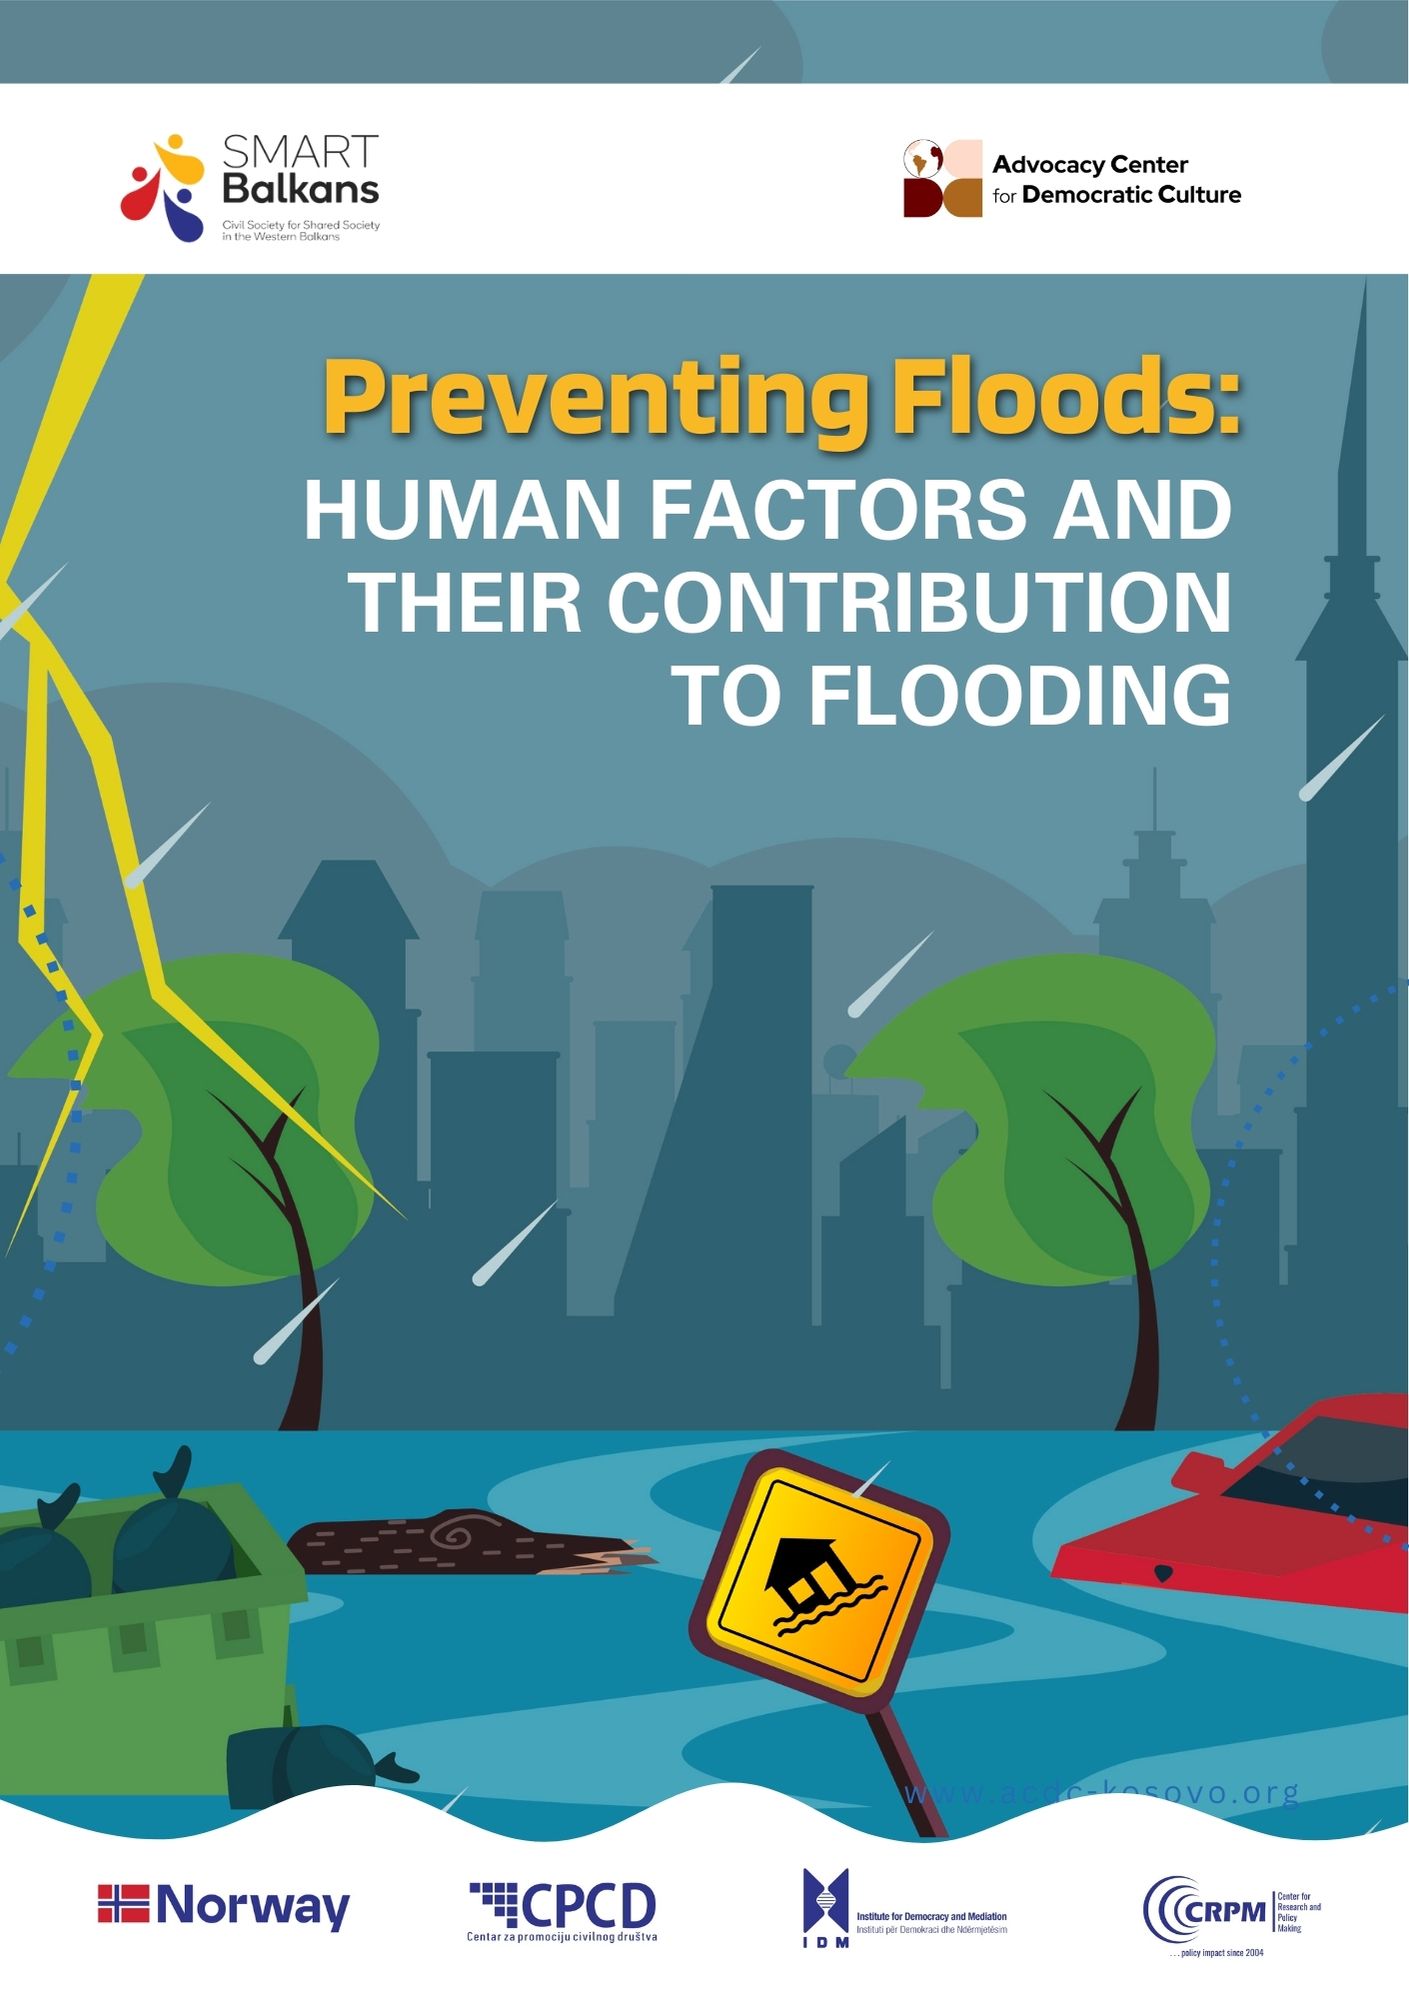 Human factors and their contribution to flooding